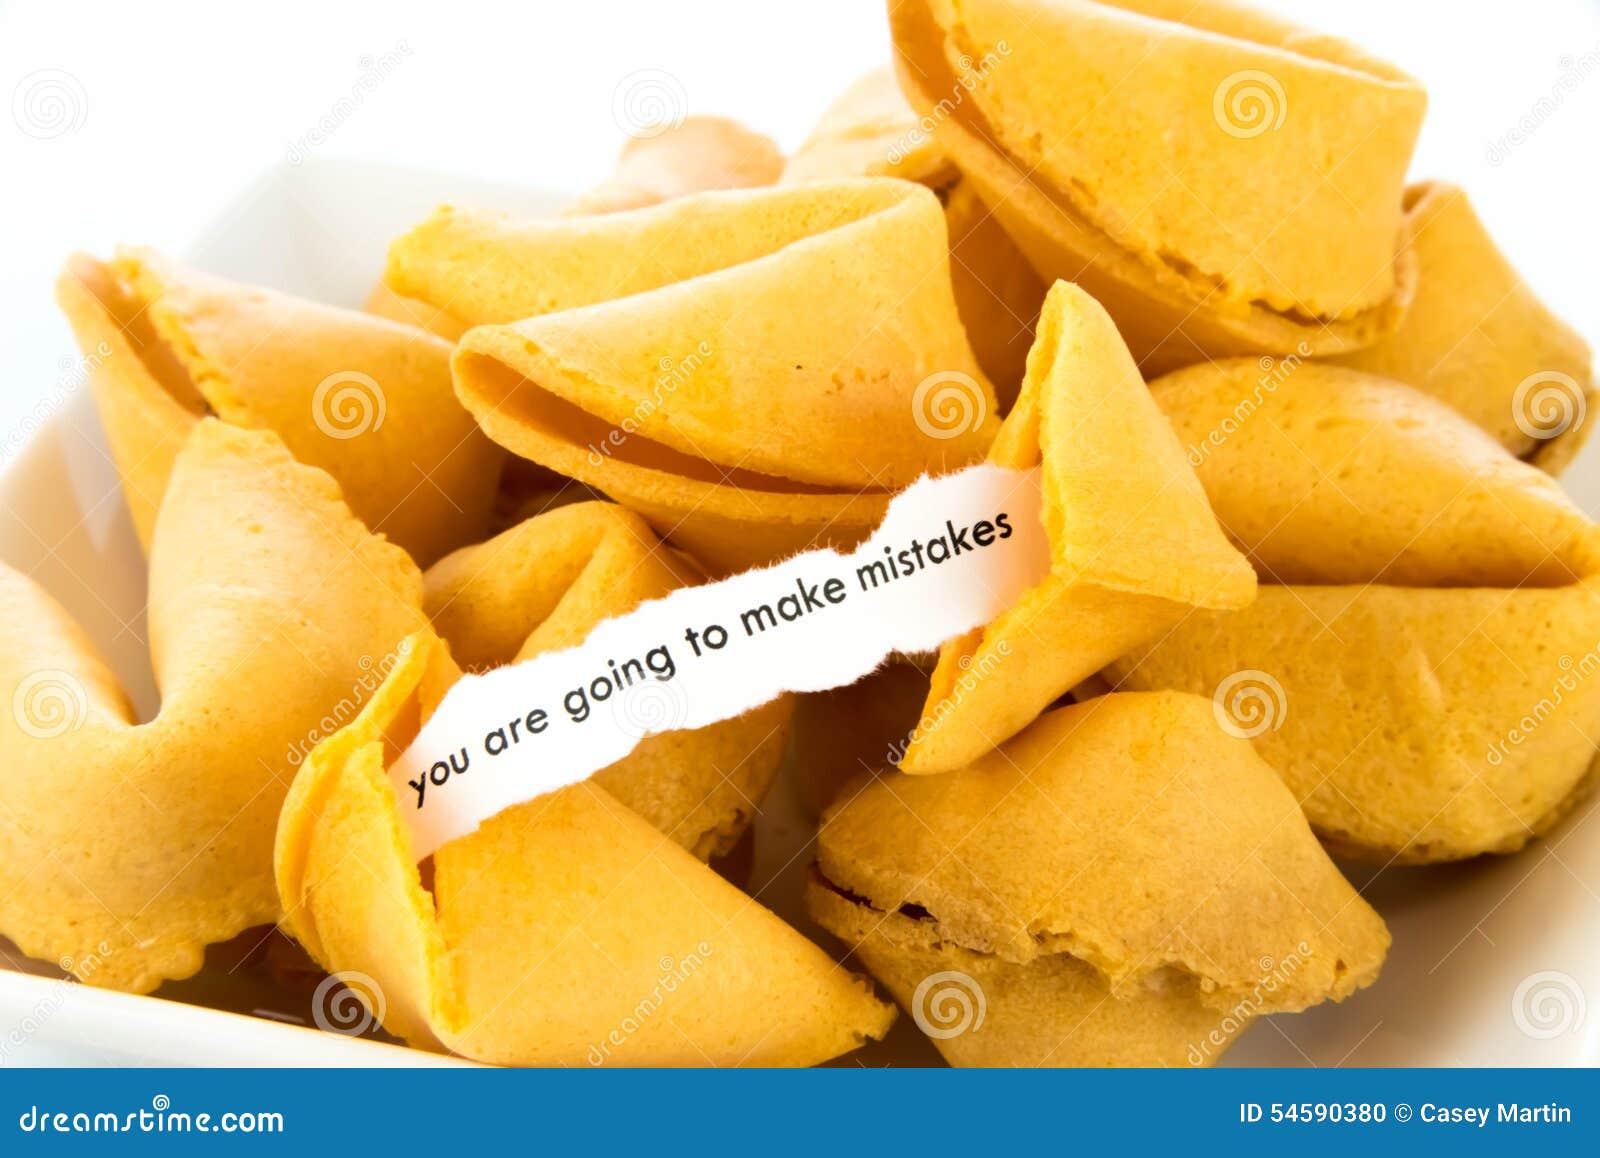 open fortune cookie - you are going to make mistakes